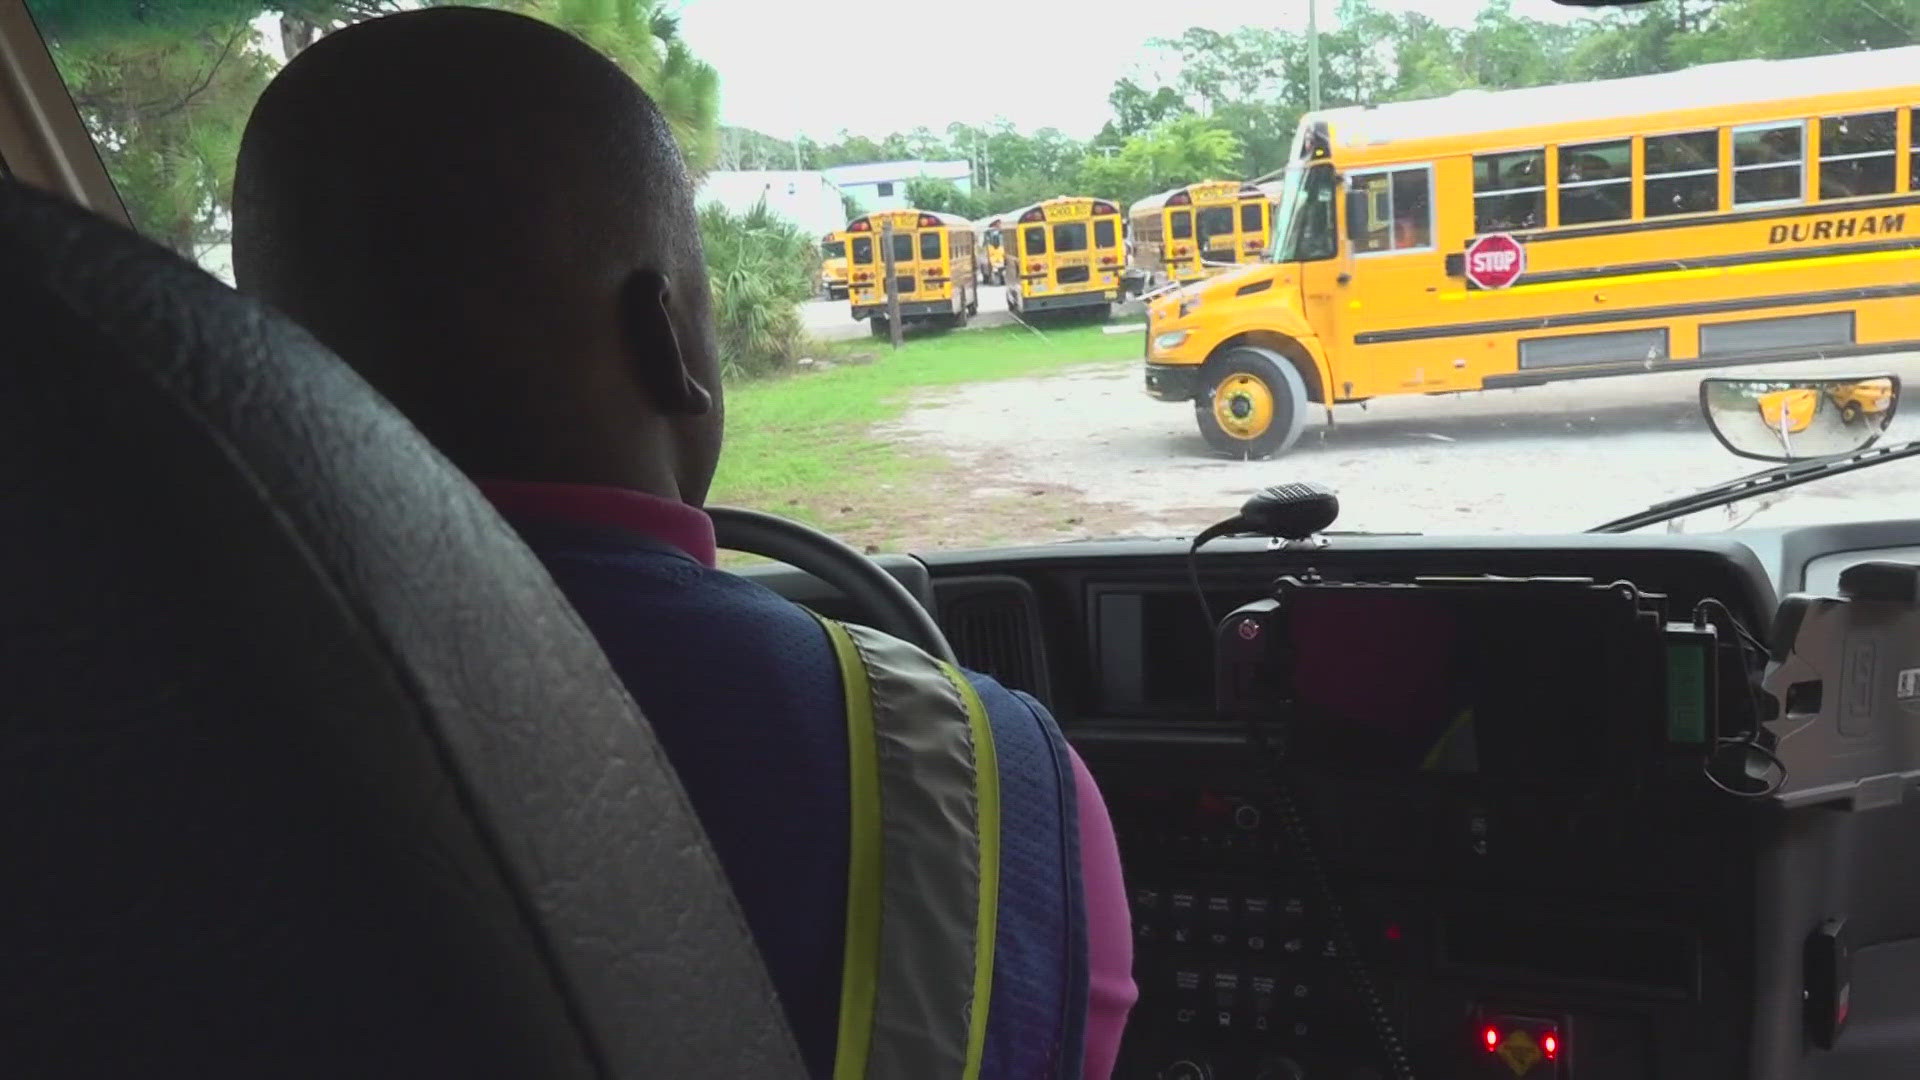 This school year, Durham is responsible for more than 400 bus routes, after a new contract reassigned some routes from Student Transportation of America.